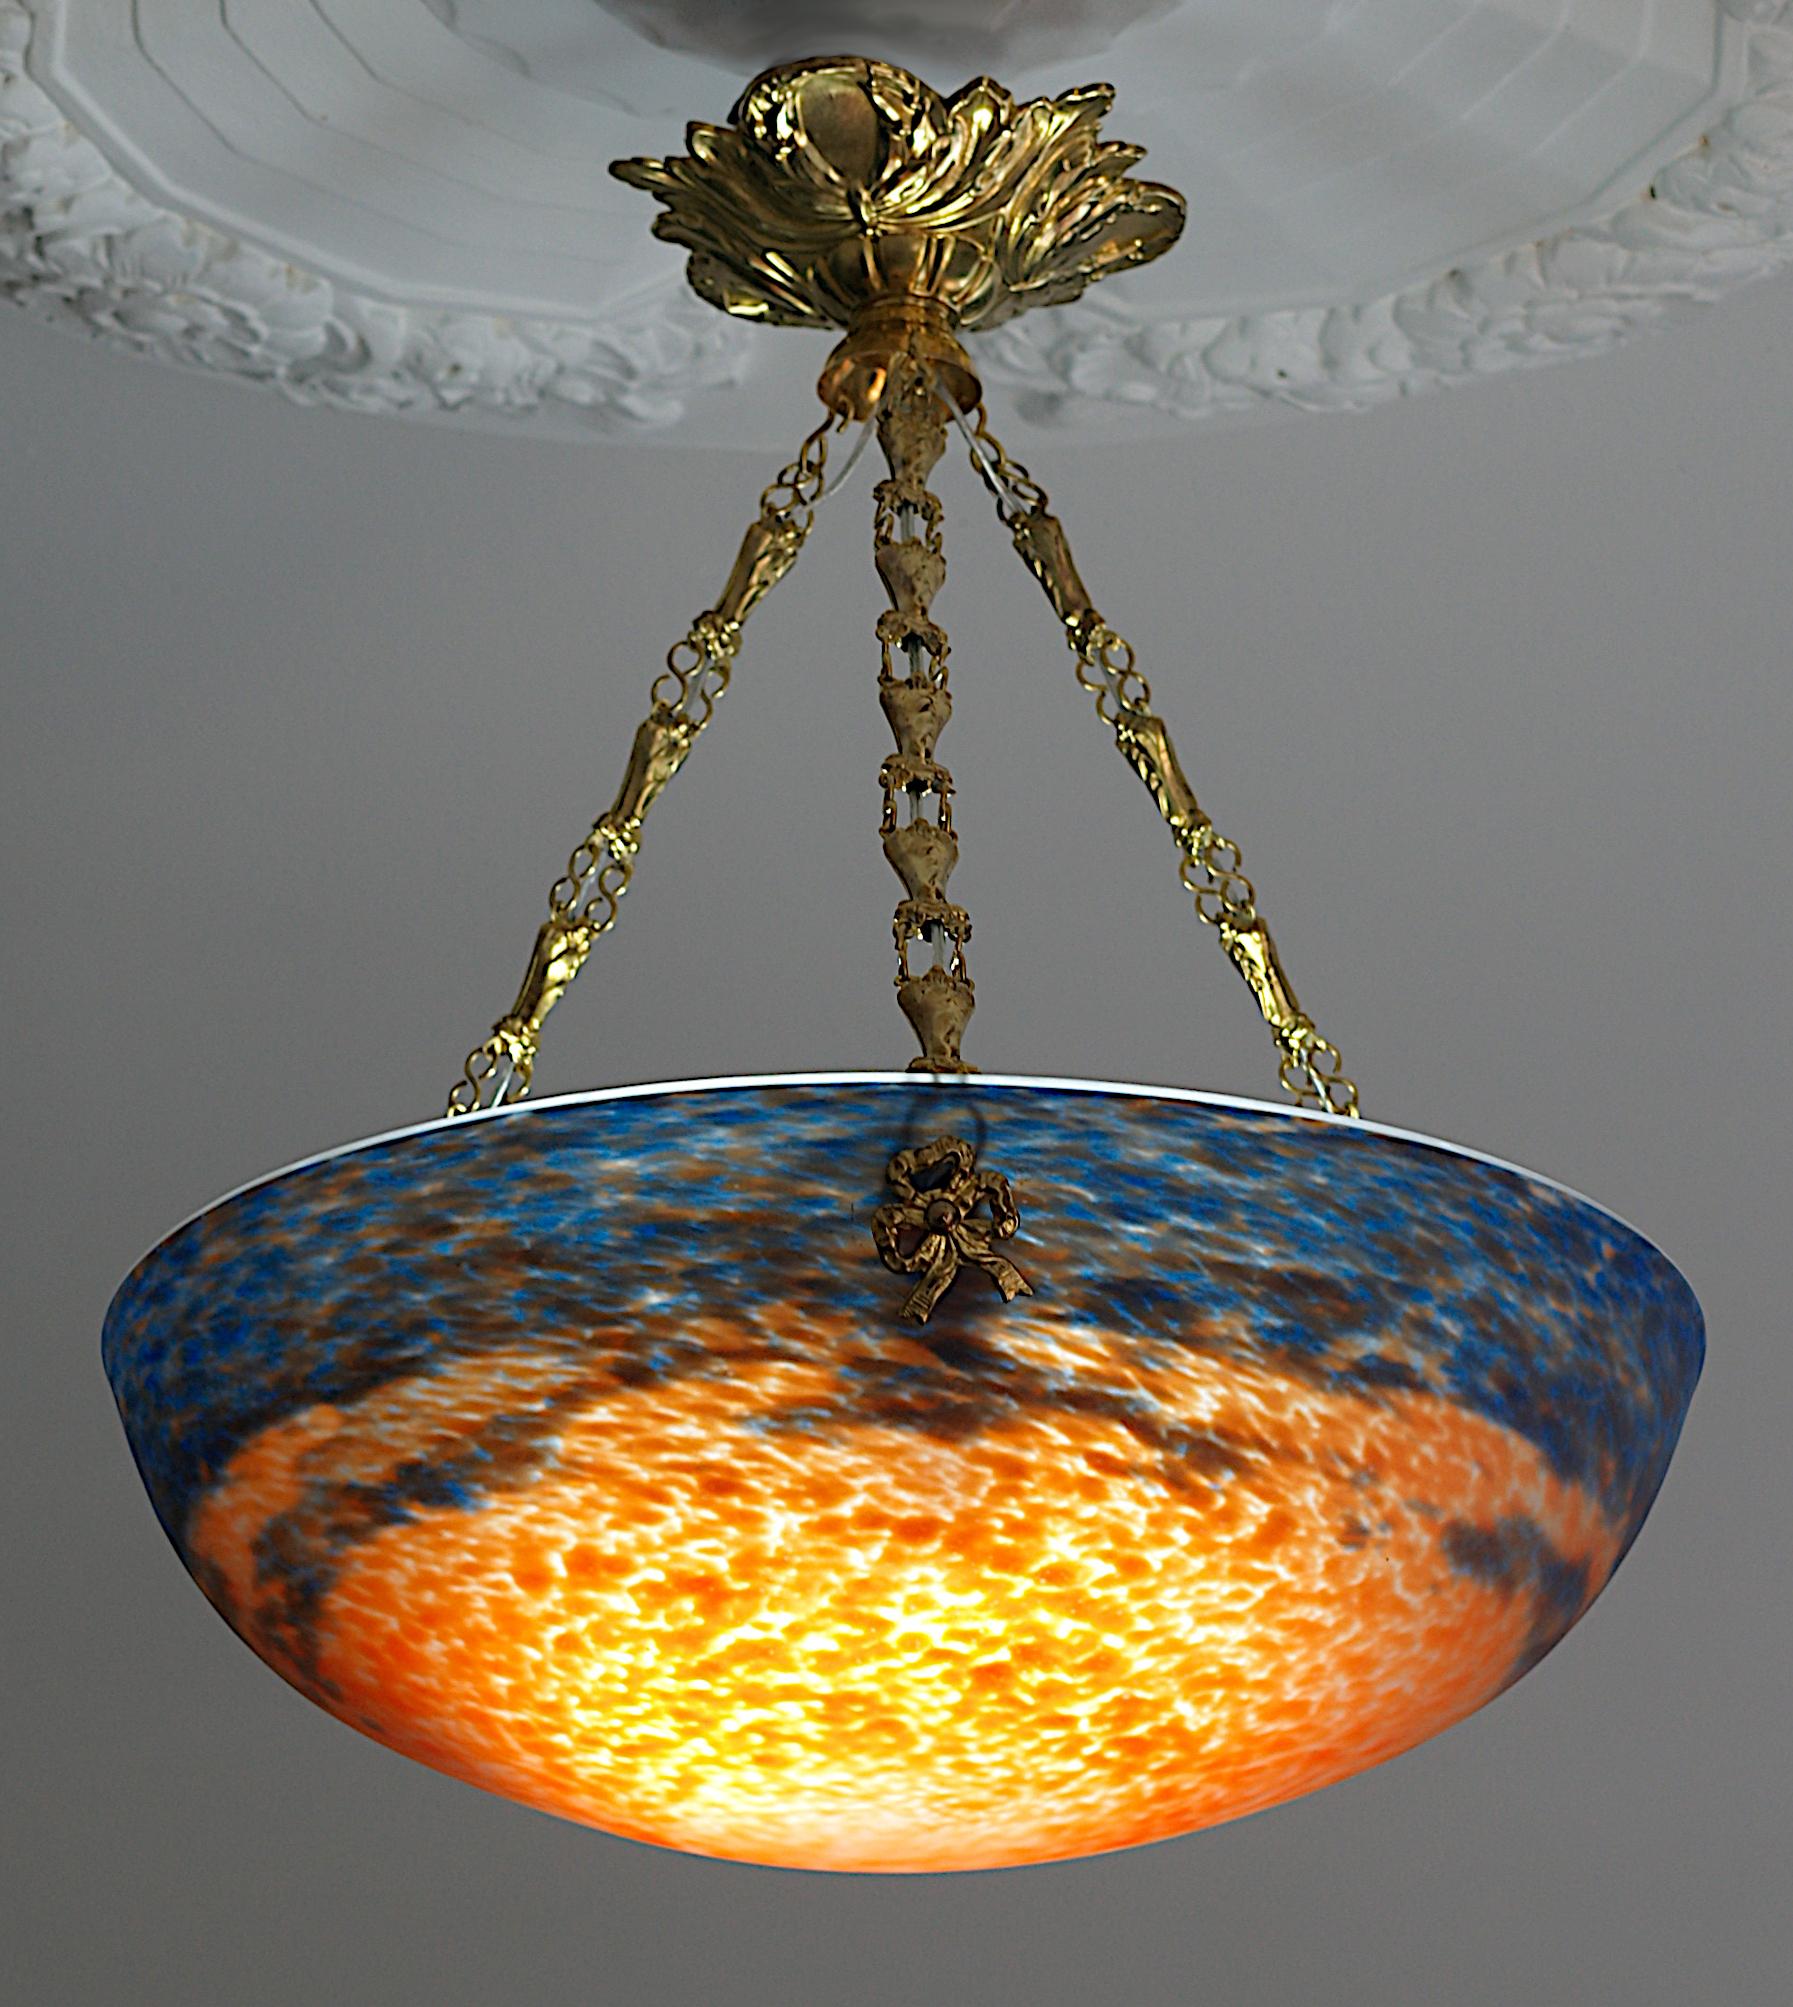 French Art Deco pendant chandelier by Muller Freres,  Croismare, France, late 1920s. Mottled glass shade, powders are applied between two layers, that comes hung at its period stamped brass fixture. Height : 15.75